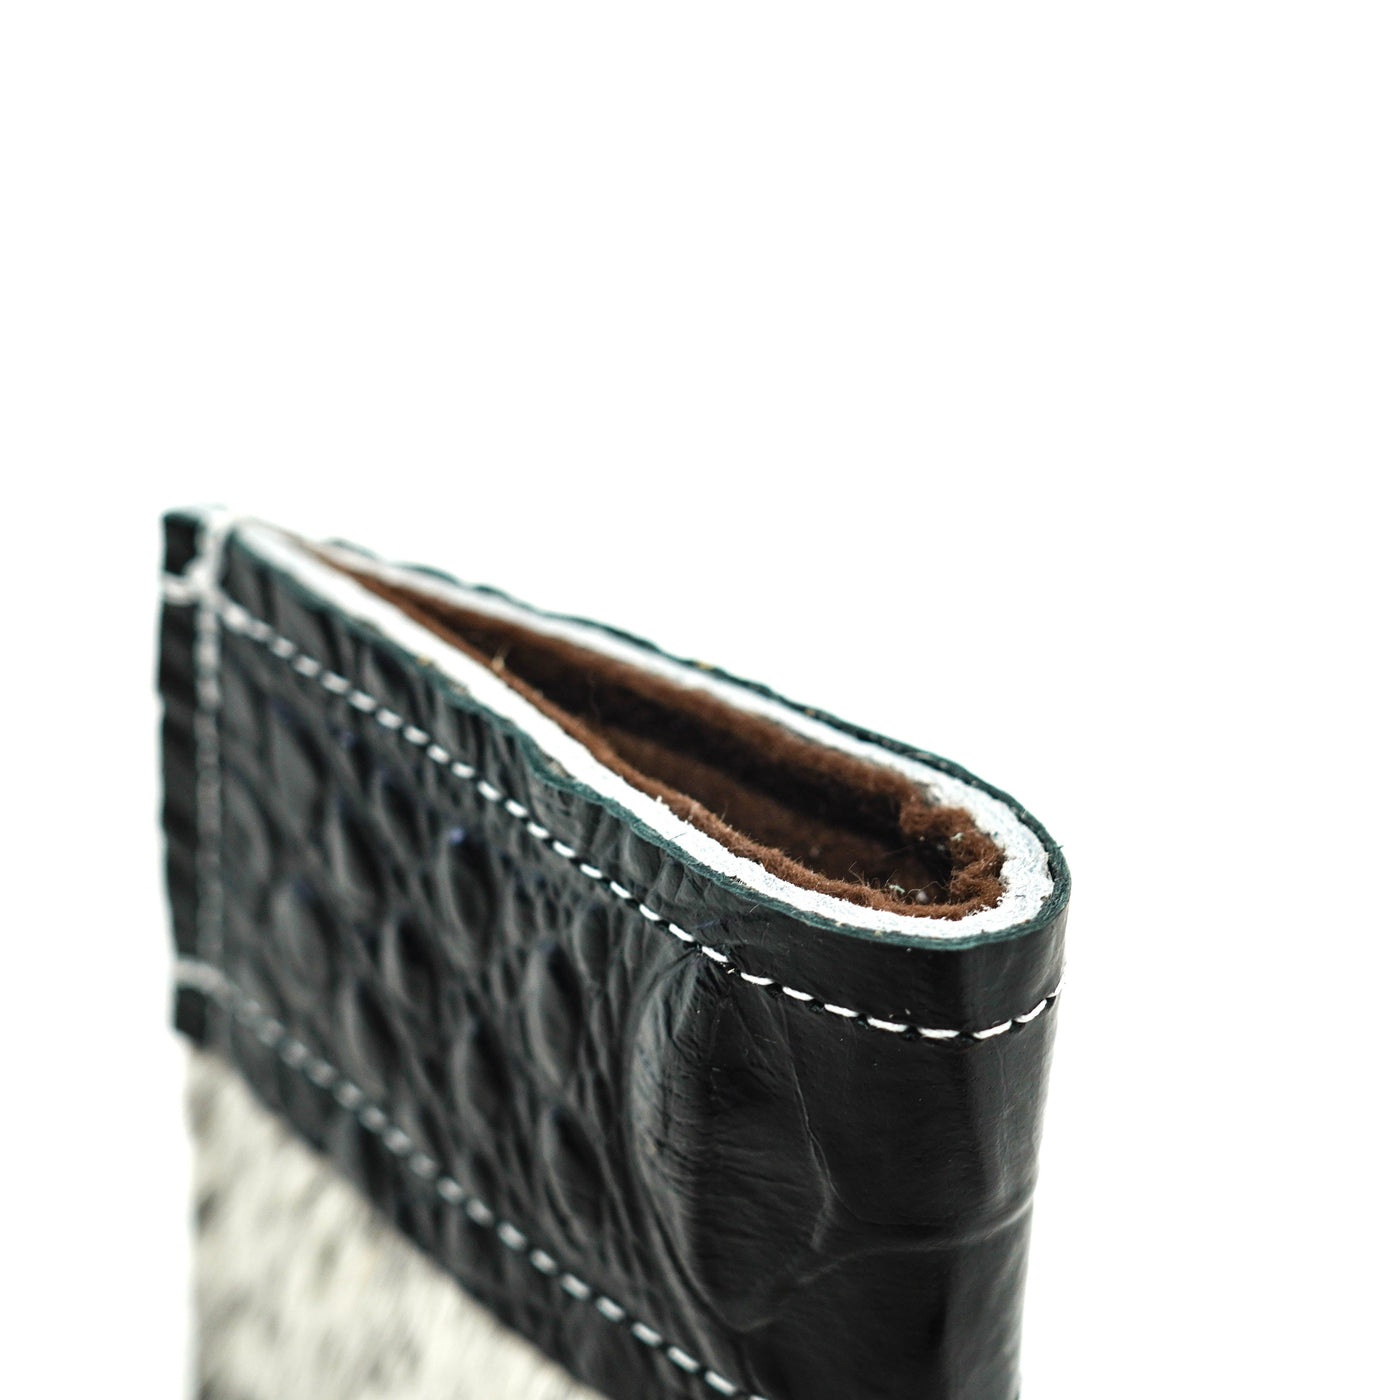 Sunglass Case - Black & White w/ Onyx Croc-Sunglass Case-Western-Cowhide-Bags-Handmade-Products-Gifts-Dancing Cactus Designs